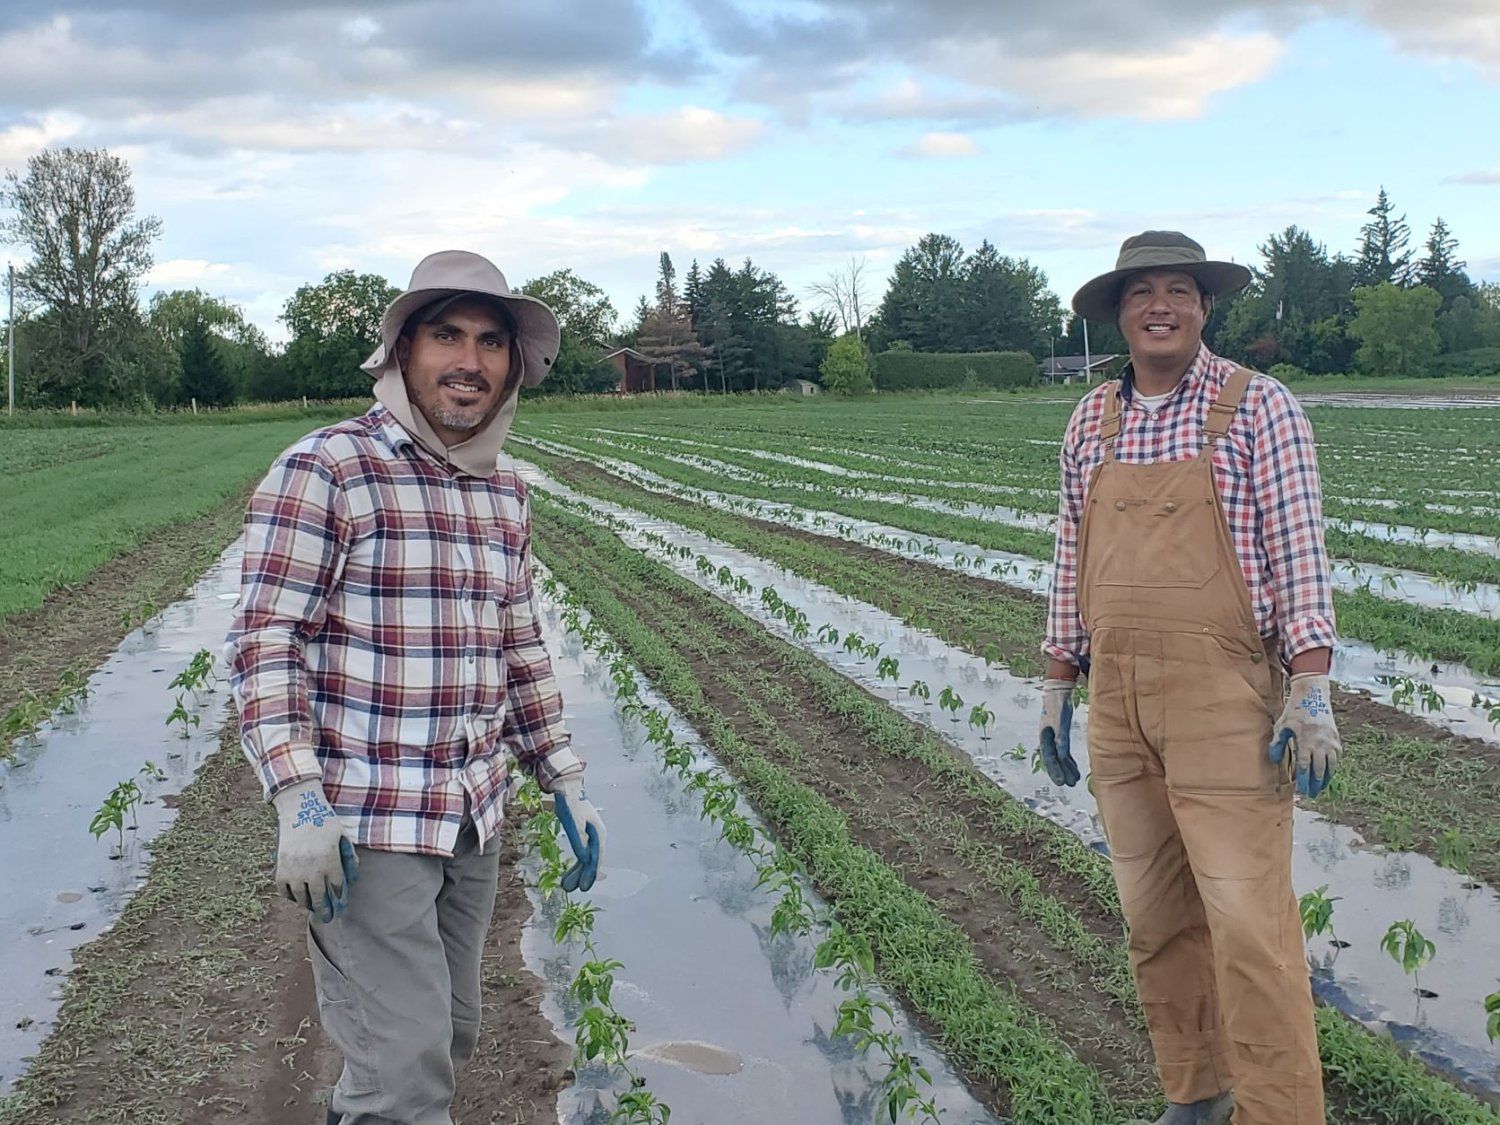 Farm Happenings for July 19, 2022 - Introducing Jaime and Marcelino